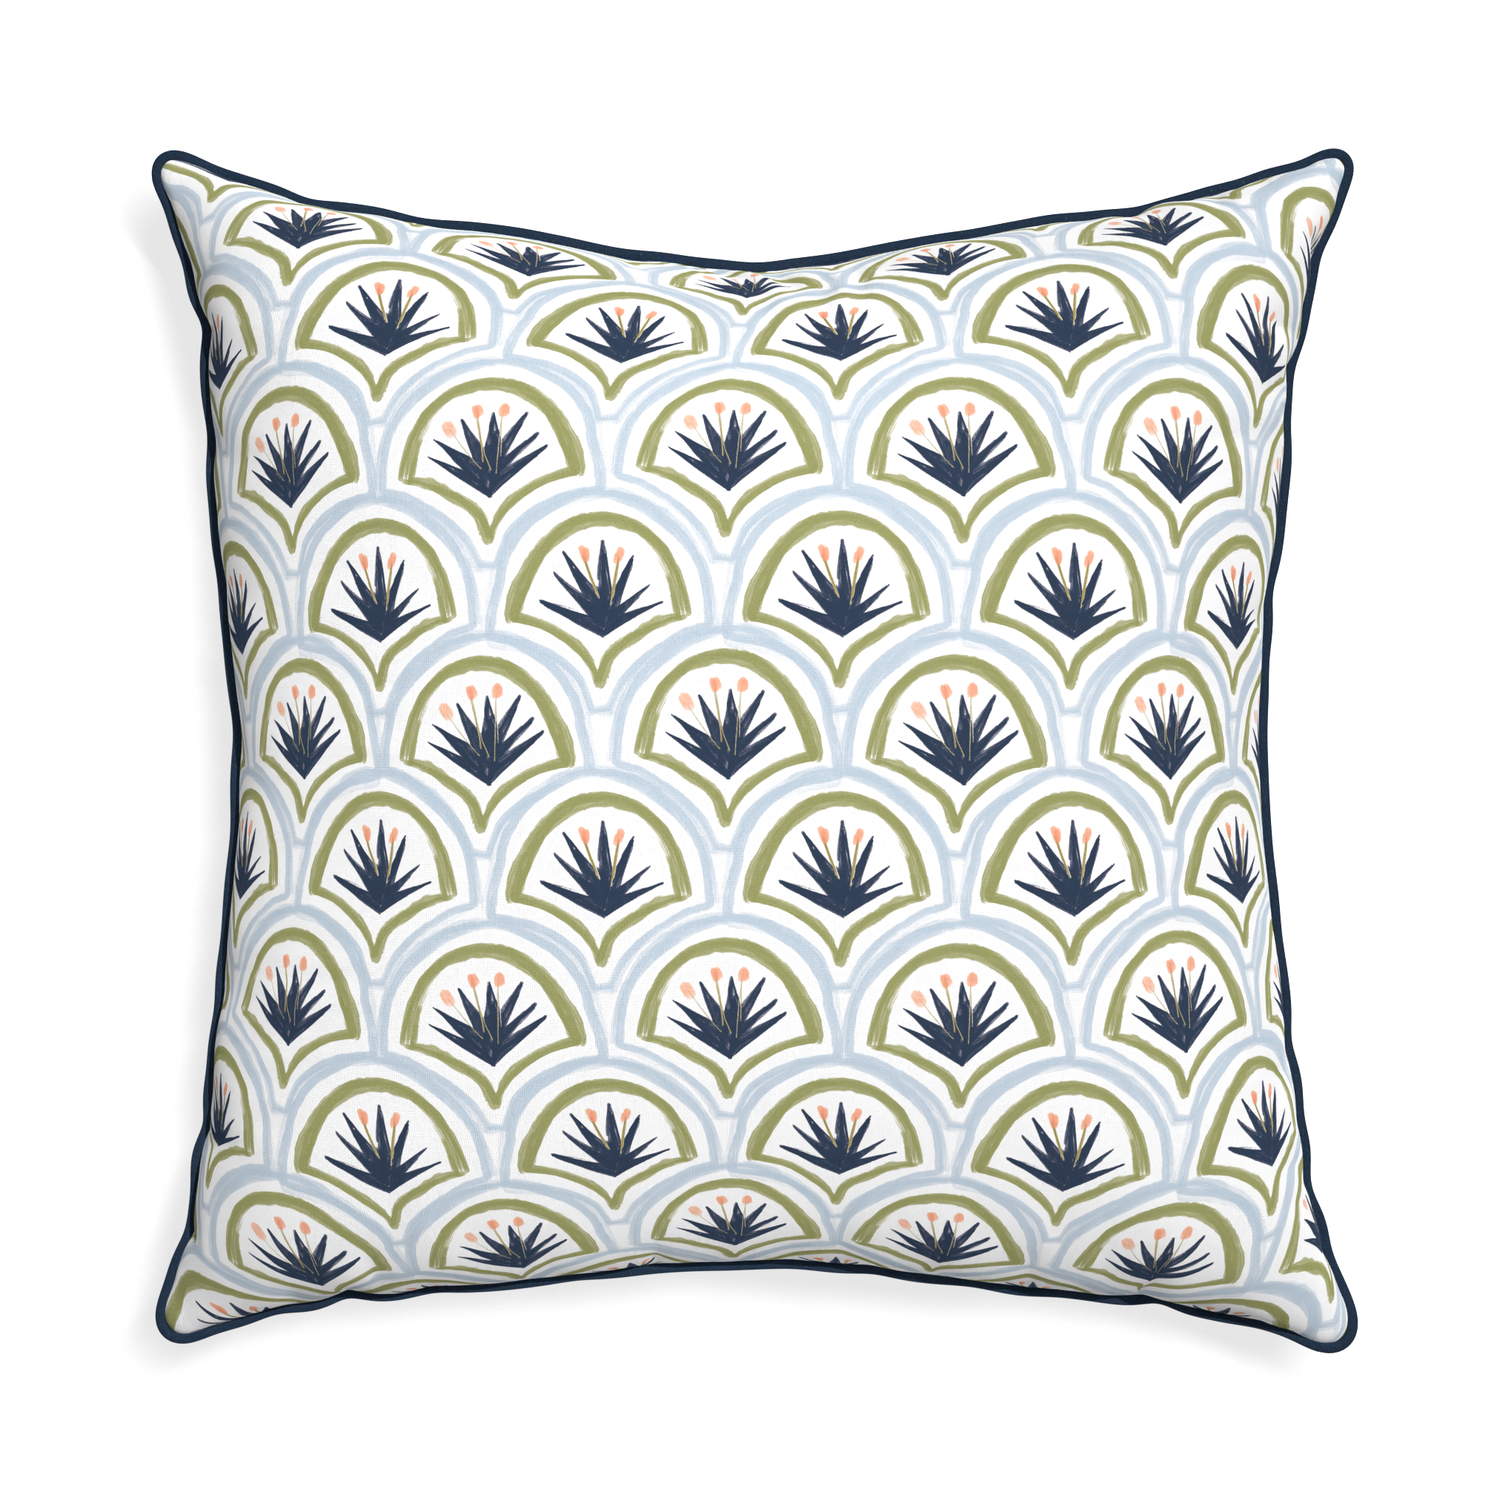 Euro-sham thatcher midnight custom art deco palm patternpillow with c piping on white background